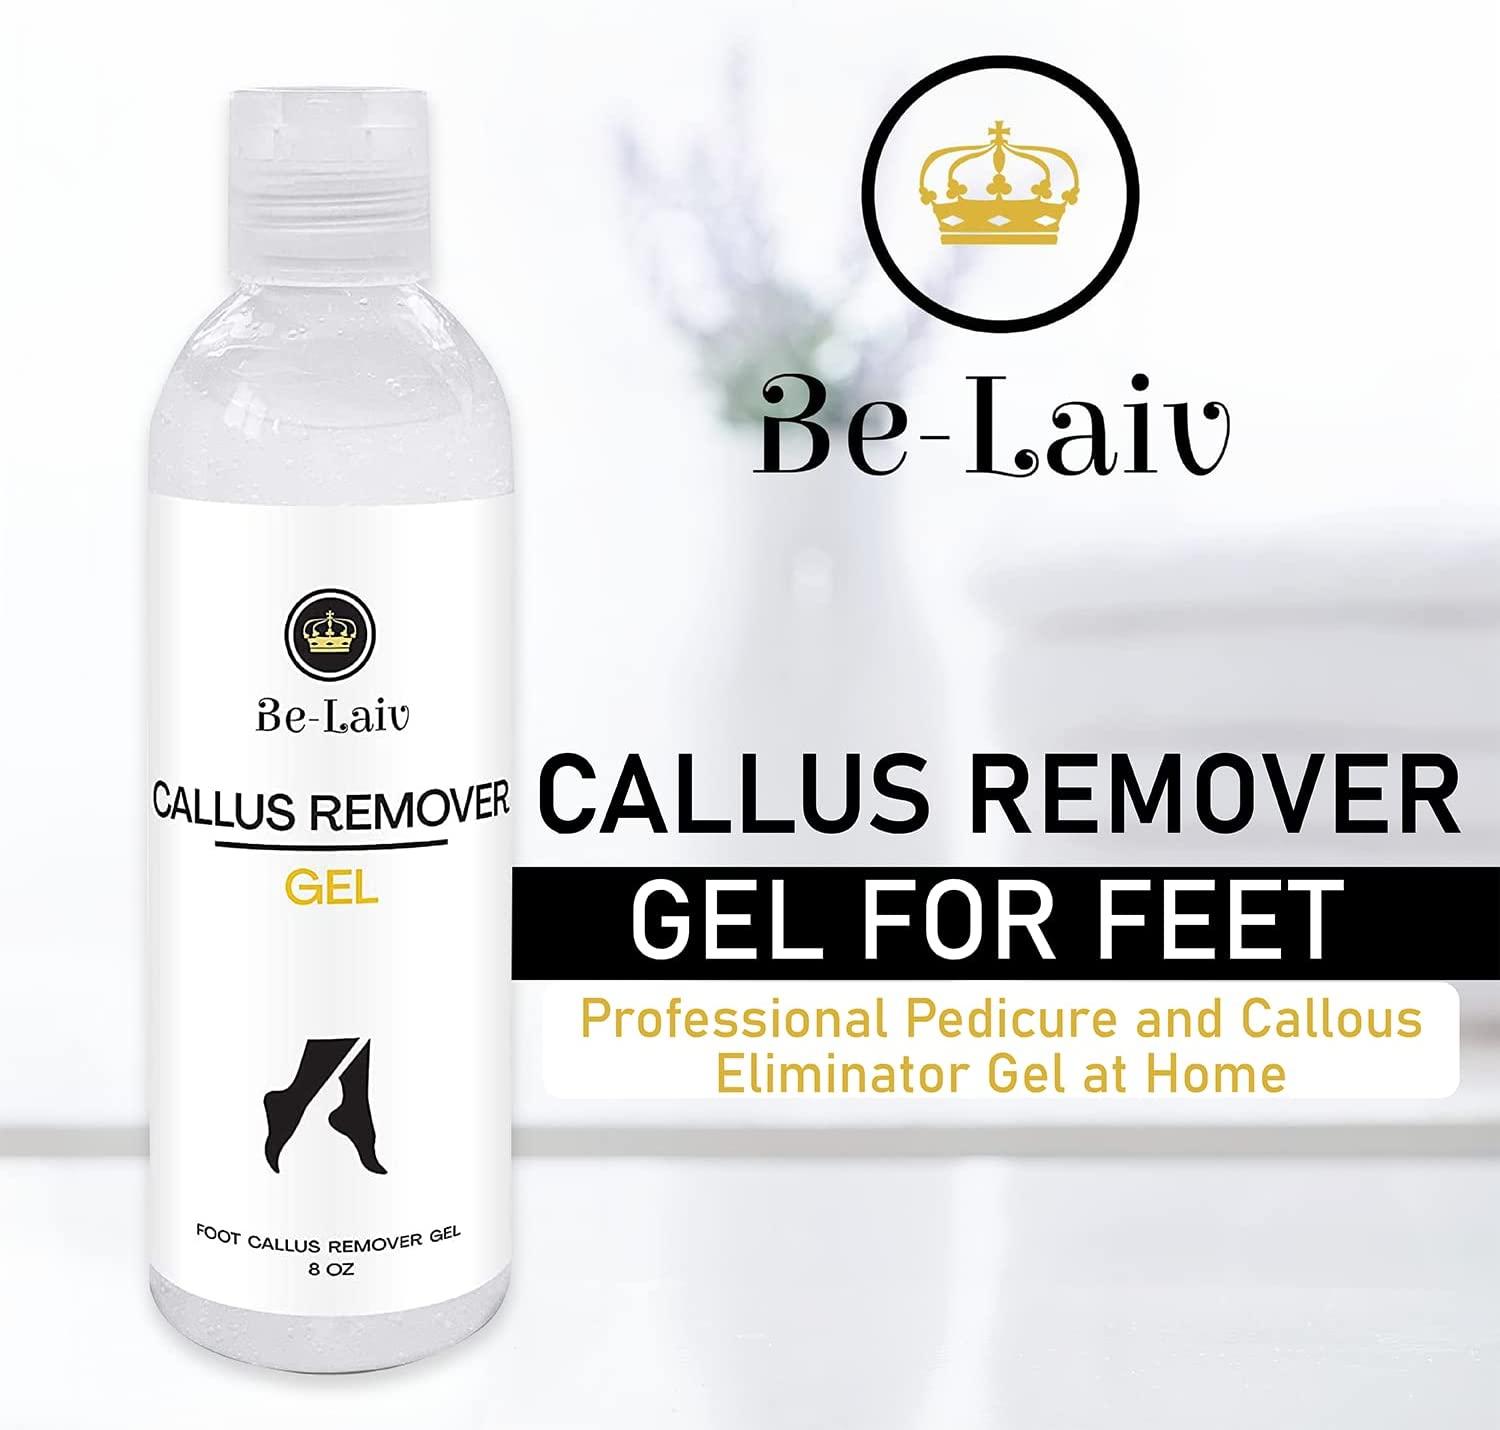 8oz Callus Remover gel for feet for a professional pedicure. Better results  than, foot fil 